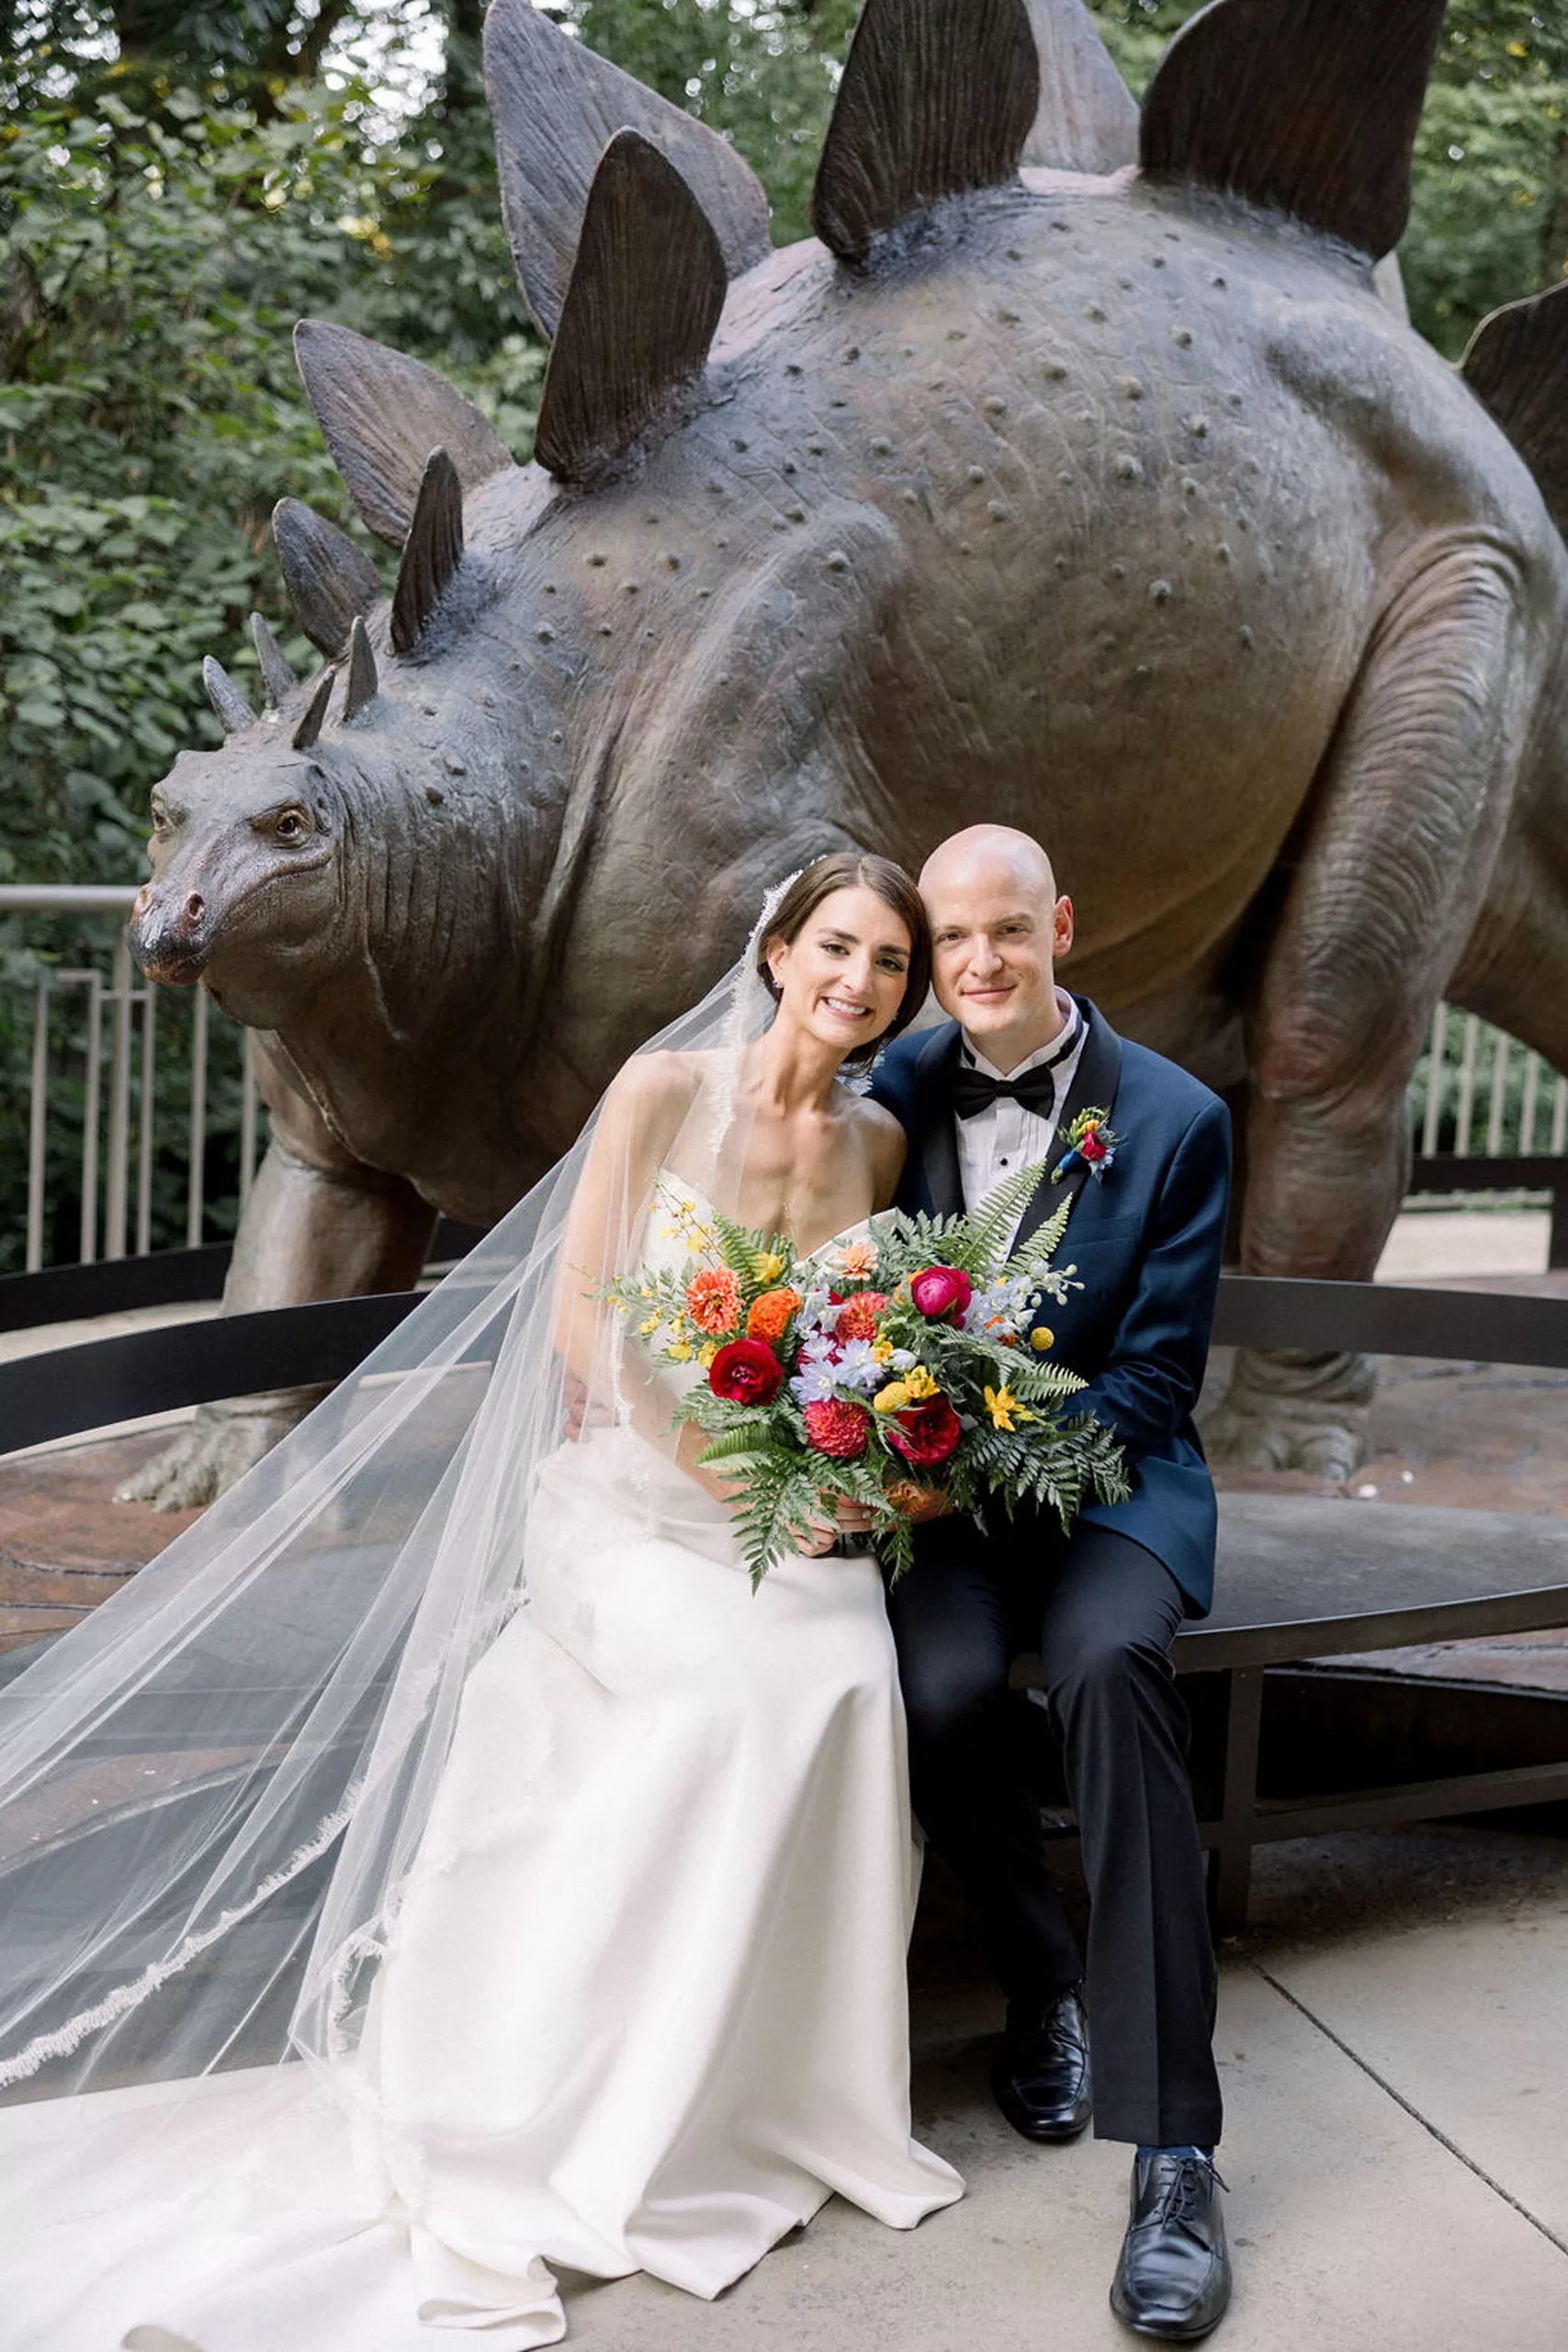 Newlyweds sit on a bench in front of a stegosaurus statue at their jurassic park wedding